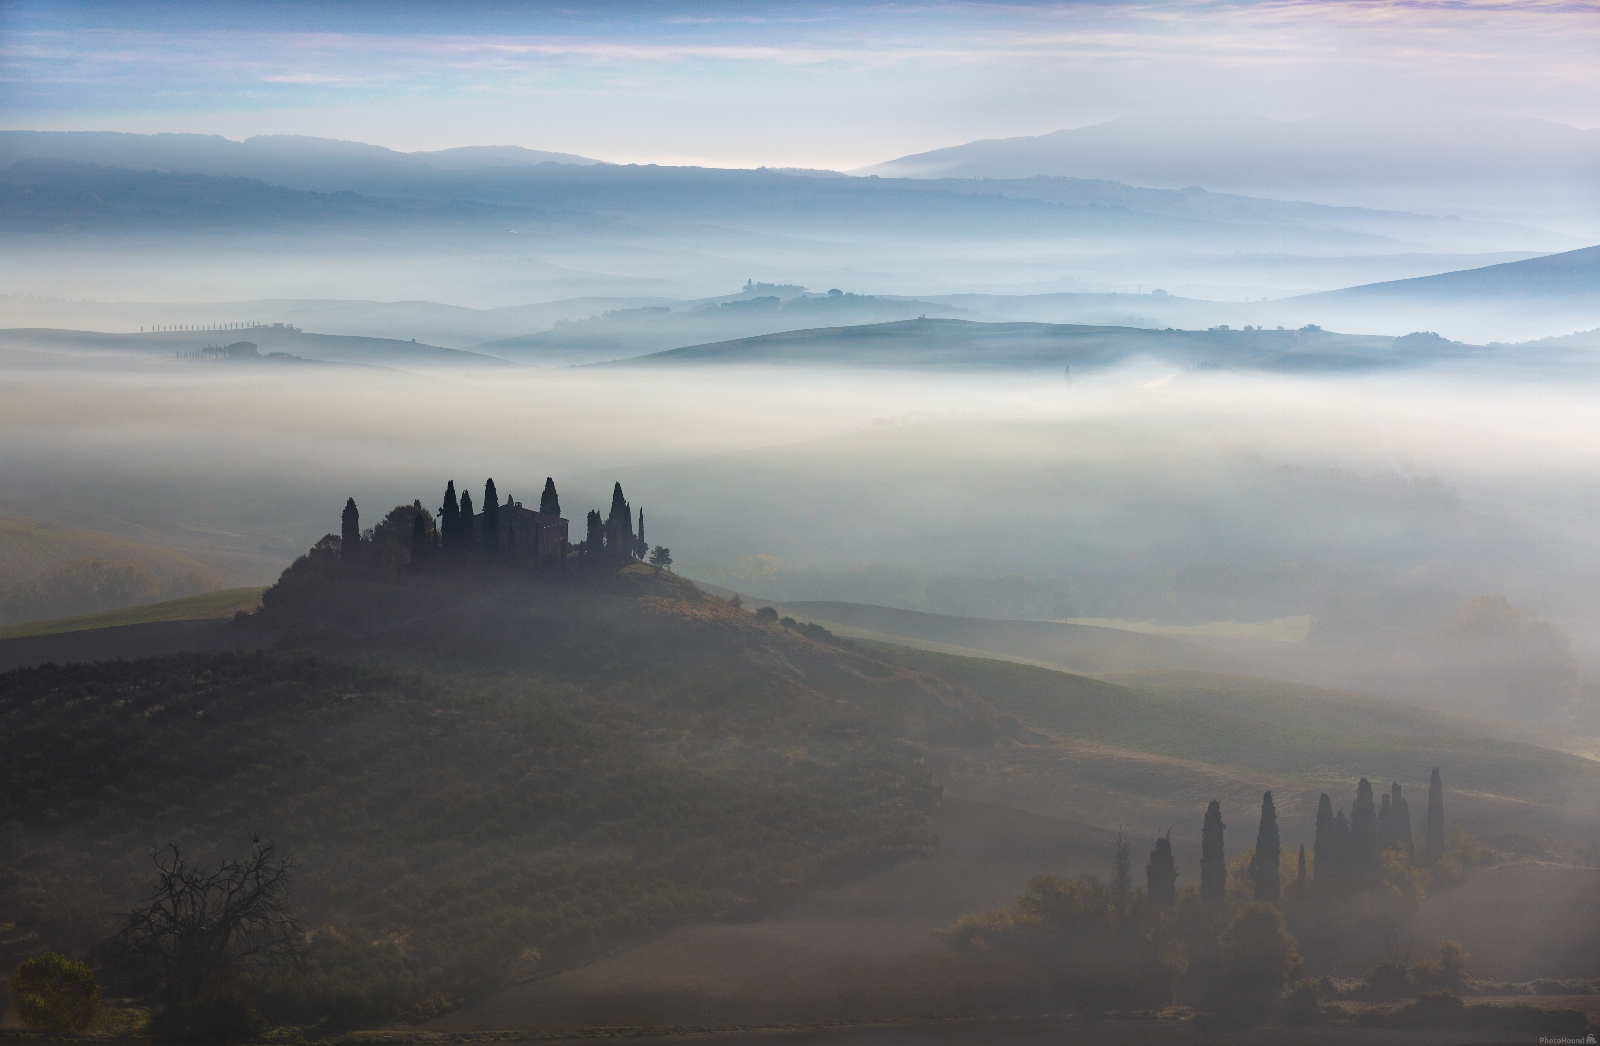 Image of Podere Belvedere by Jeff Martin